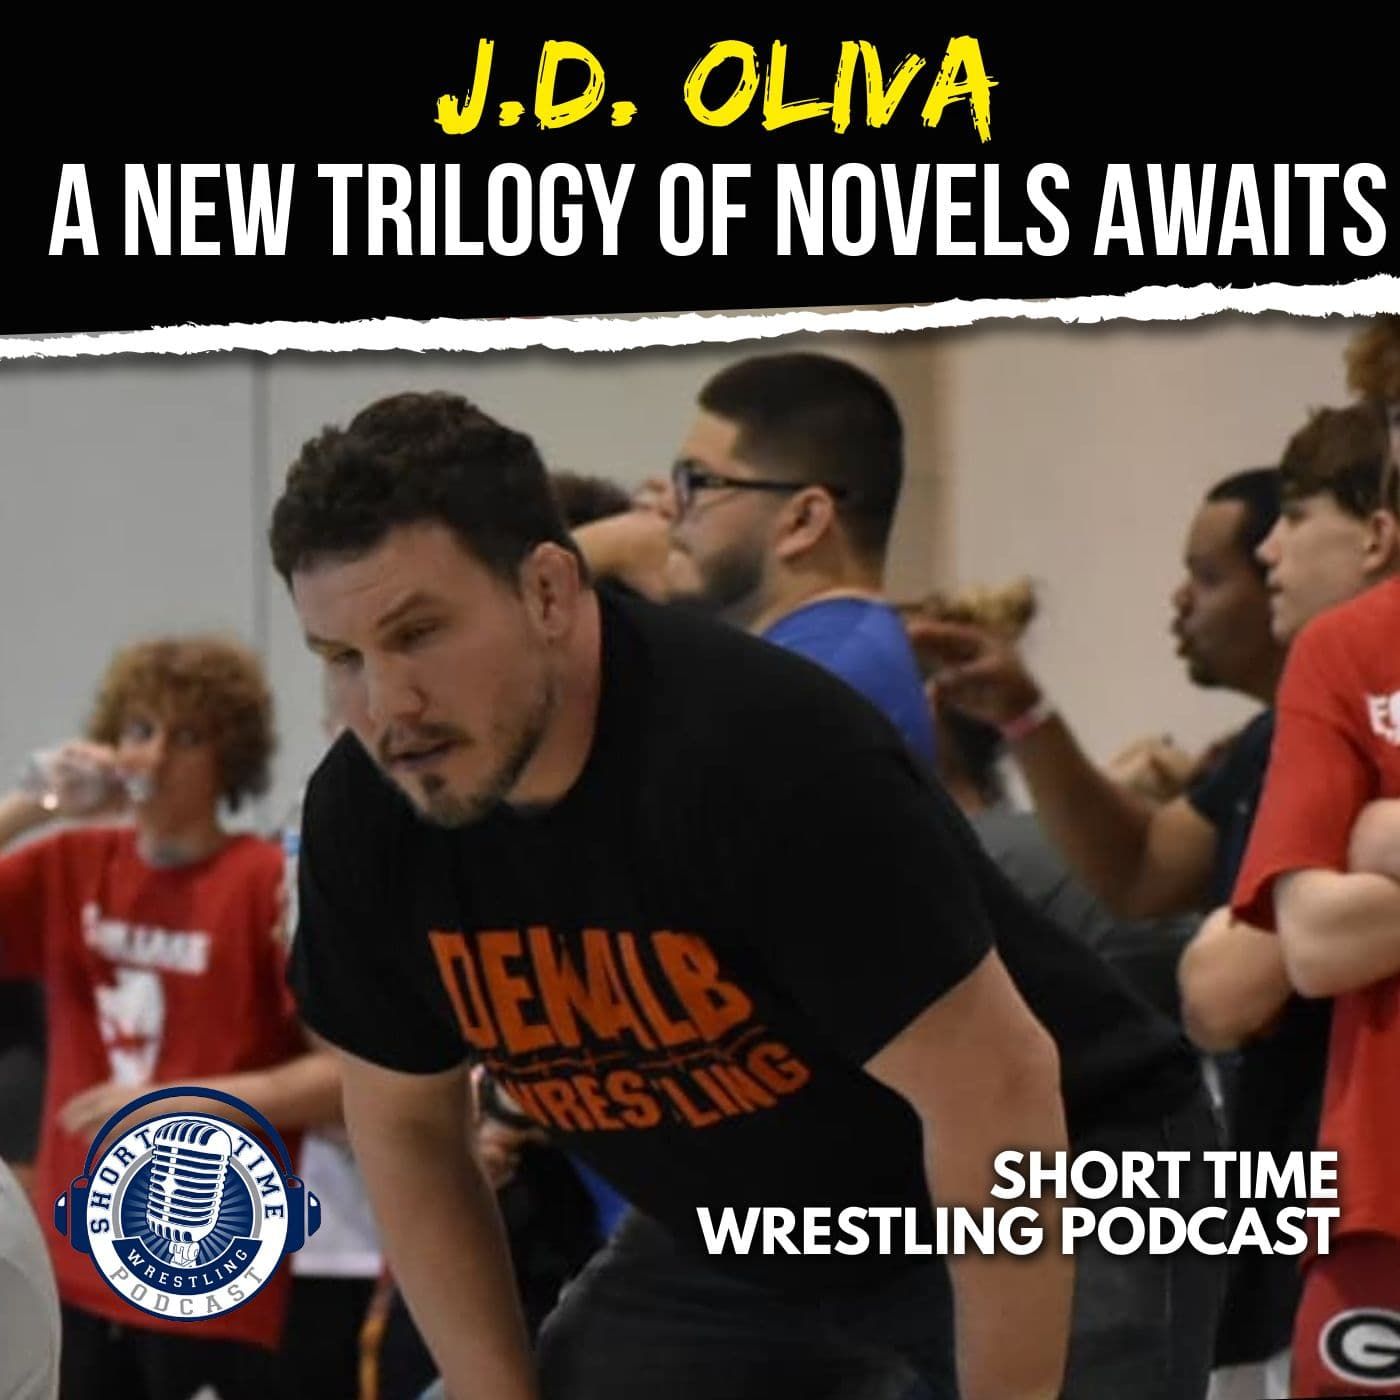 Wrestling coach and author J.D. Oliva launches his next trilogy of novels